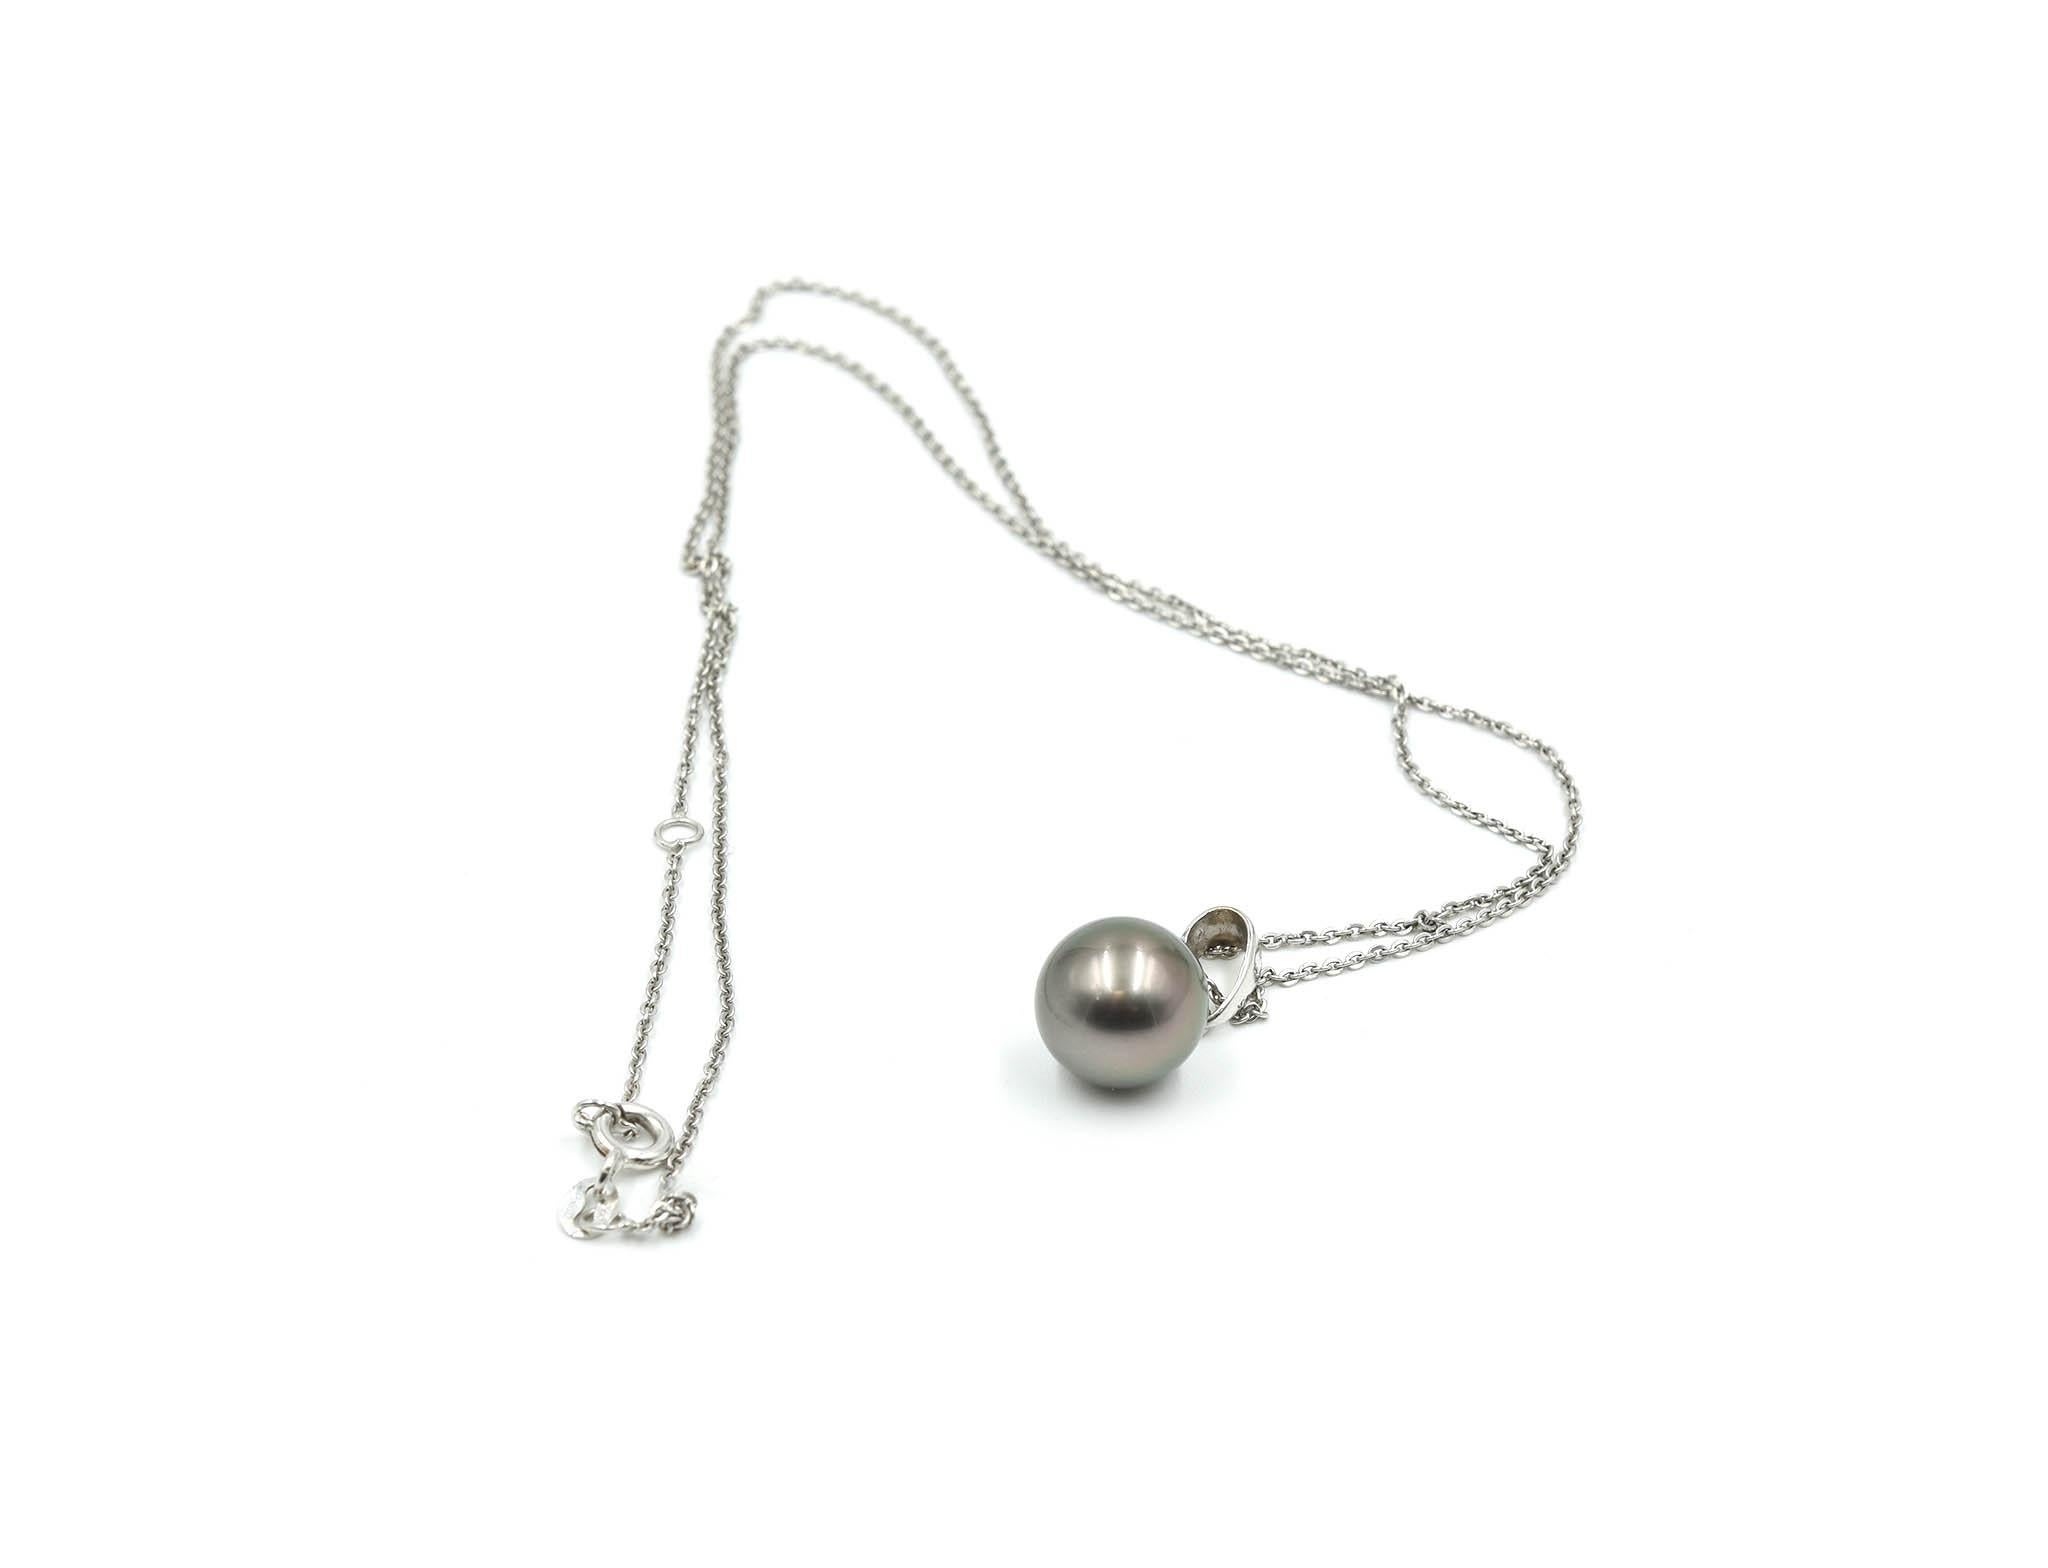 This necklace is crafted in 18k white gold featuring a simple cap and bail pendant holding an 10.7mm Tahitian pearl. The pendant is suspended on a simple link 18” inch long chain. This necklace weighs 1.2 grams. 

